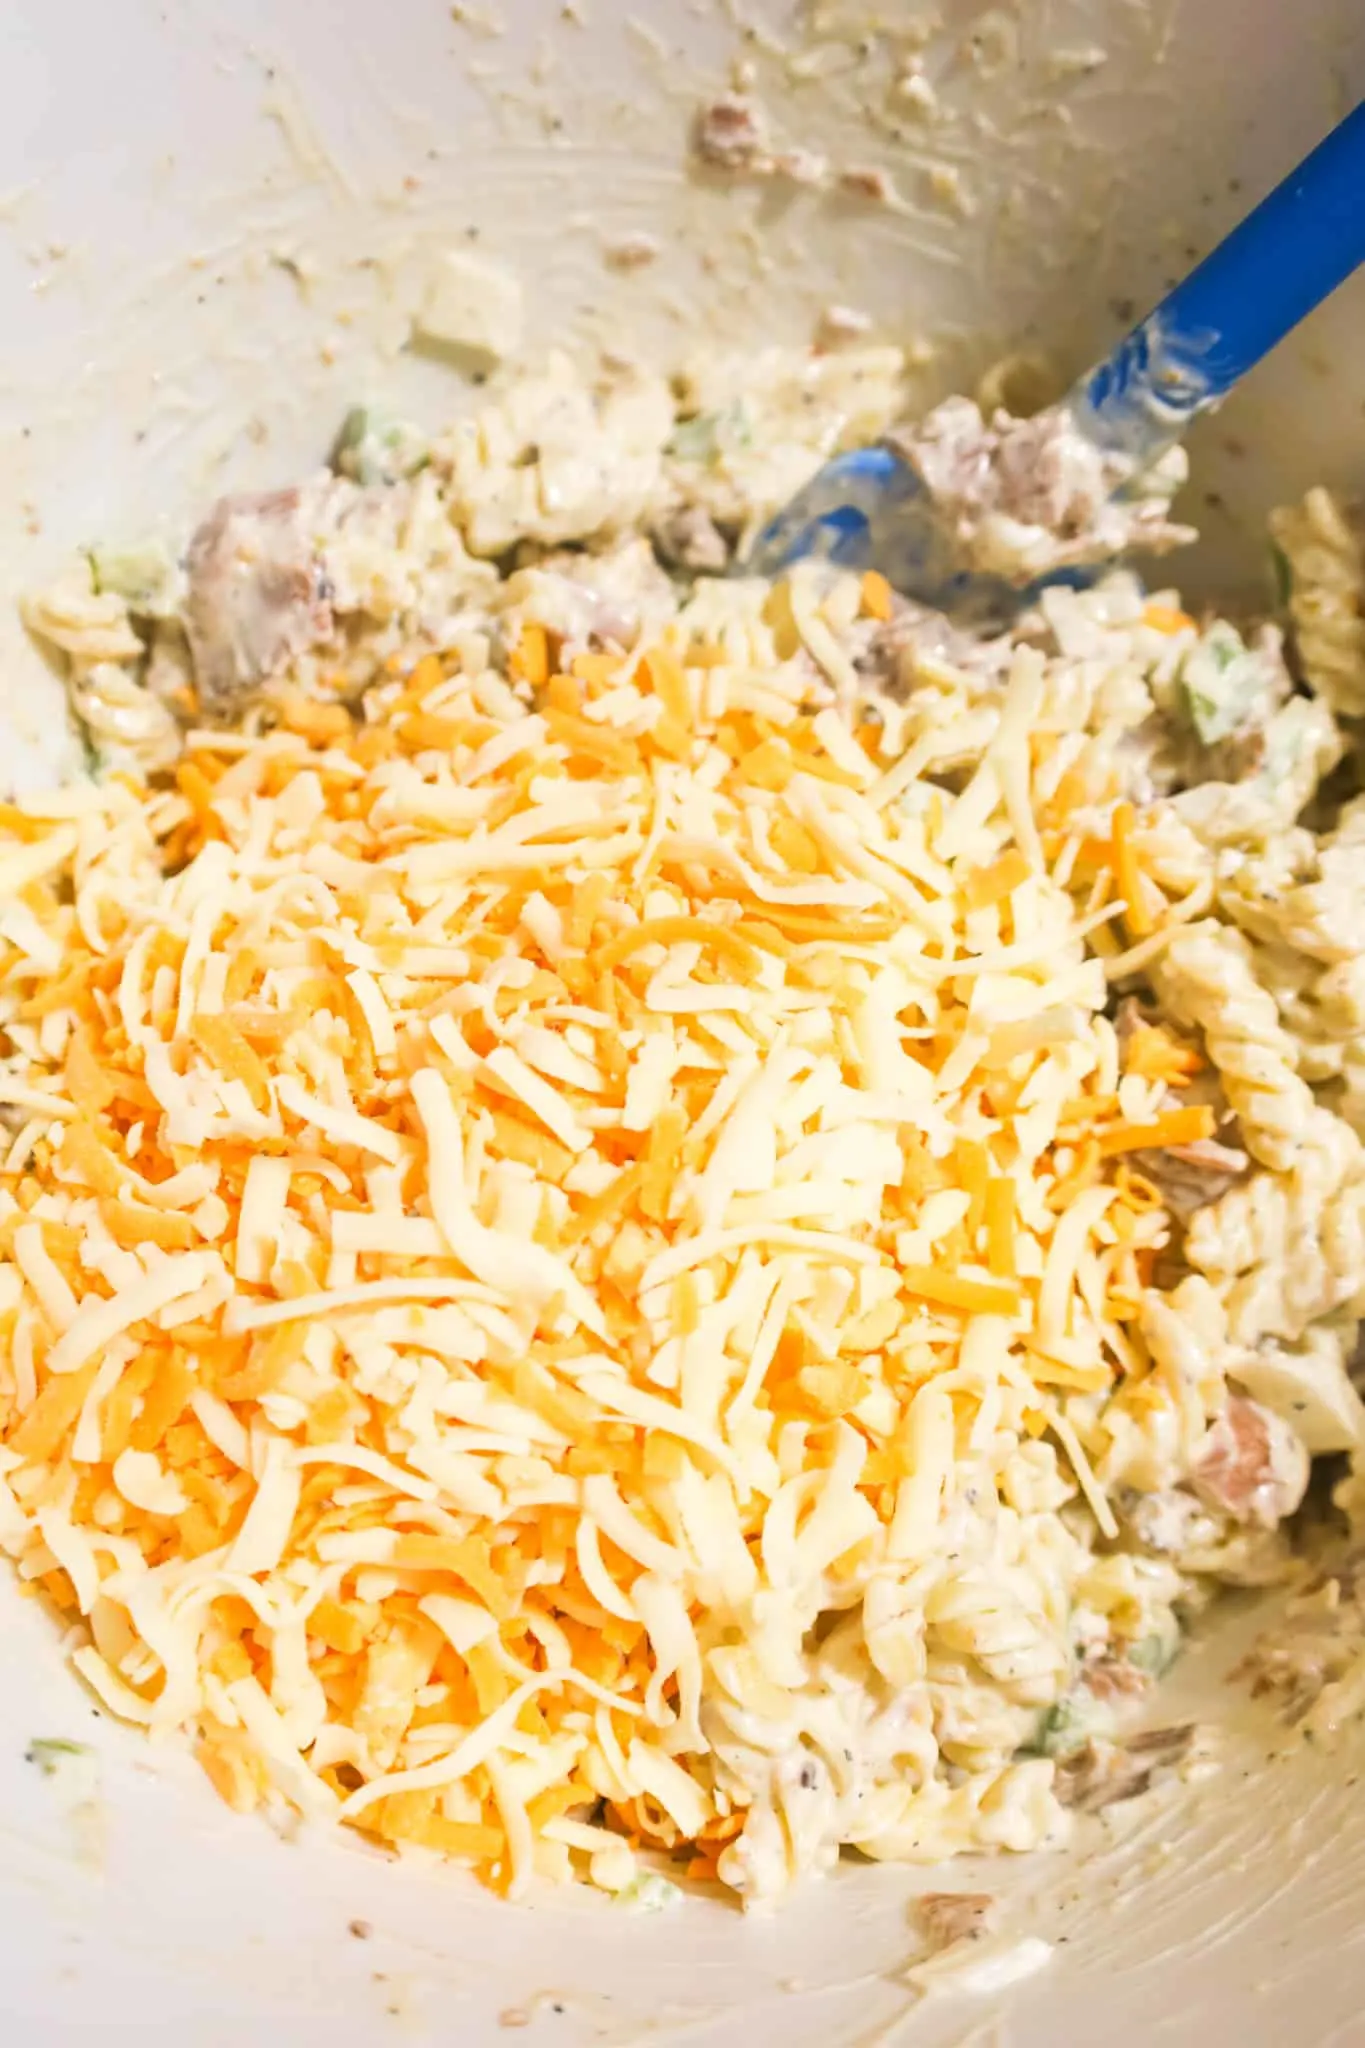 shredded cheese on top of pasta salad in a mixing bowl